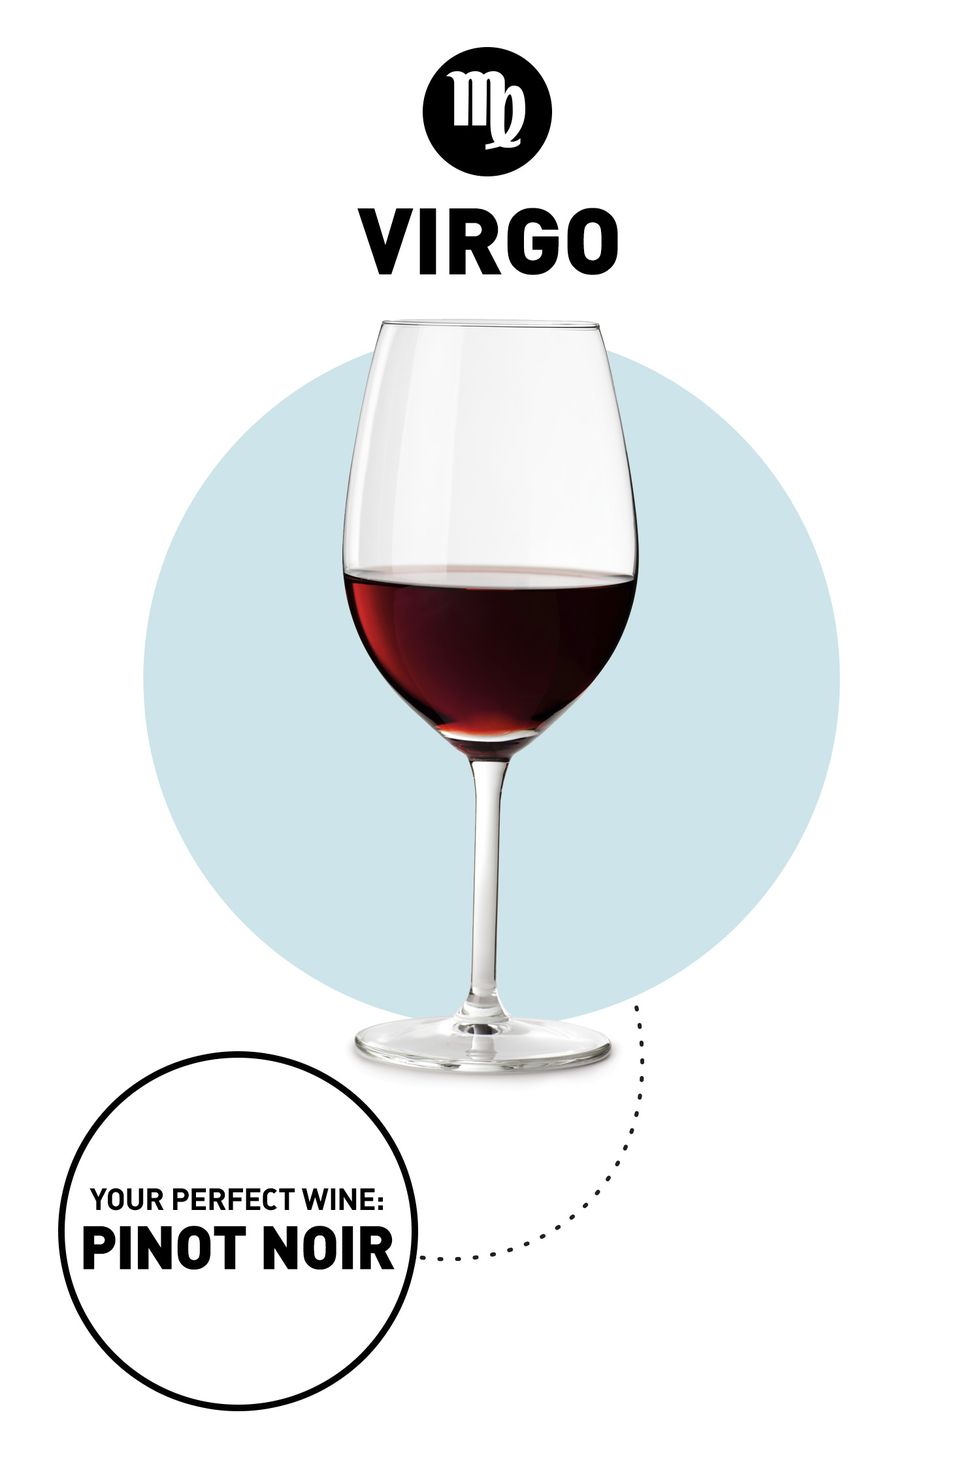 <p><strong>Your Drink:</strong> Pinot Noir</p><p><strong>Why: </strong>No, it's not just because you die every time you hear <a href="https://www.youtube.com/watch?v=A6yttOfIvOw" target="_blank">Titus Andromedon's song in <em>Unbreakable Kimmy Schmidt</em></a> (no zodiac sign is immune to that one). Virgos are purists who appreciate careful attention to detail, and that's exactly how Pinot Noir is made. The delicate grapes can easily die, so growers must be focused on making sure their conditions are just right so the vineyard can flourish, resulting in a light-bodied wine with raspberry jam flavors that you can enjoy year-round.</p>